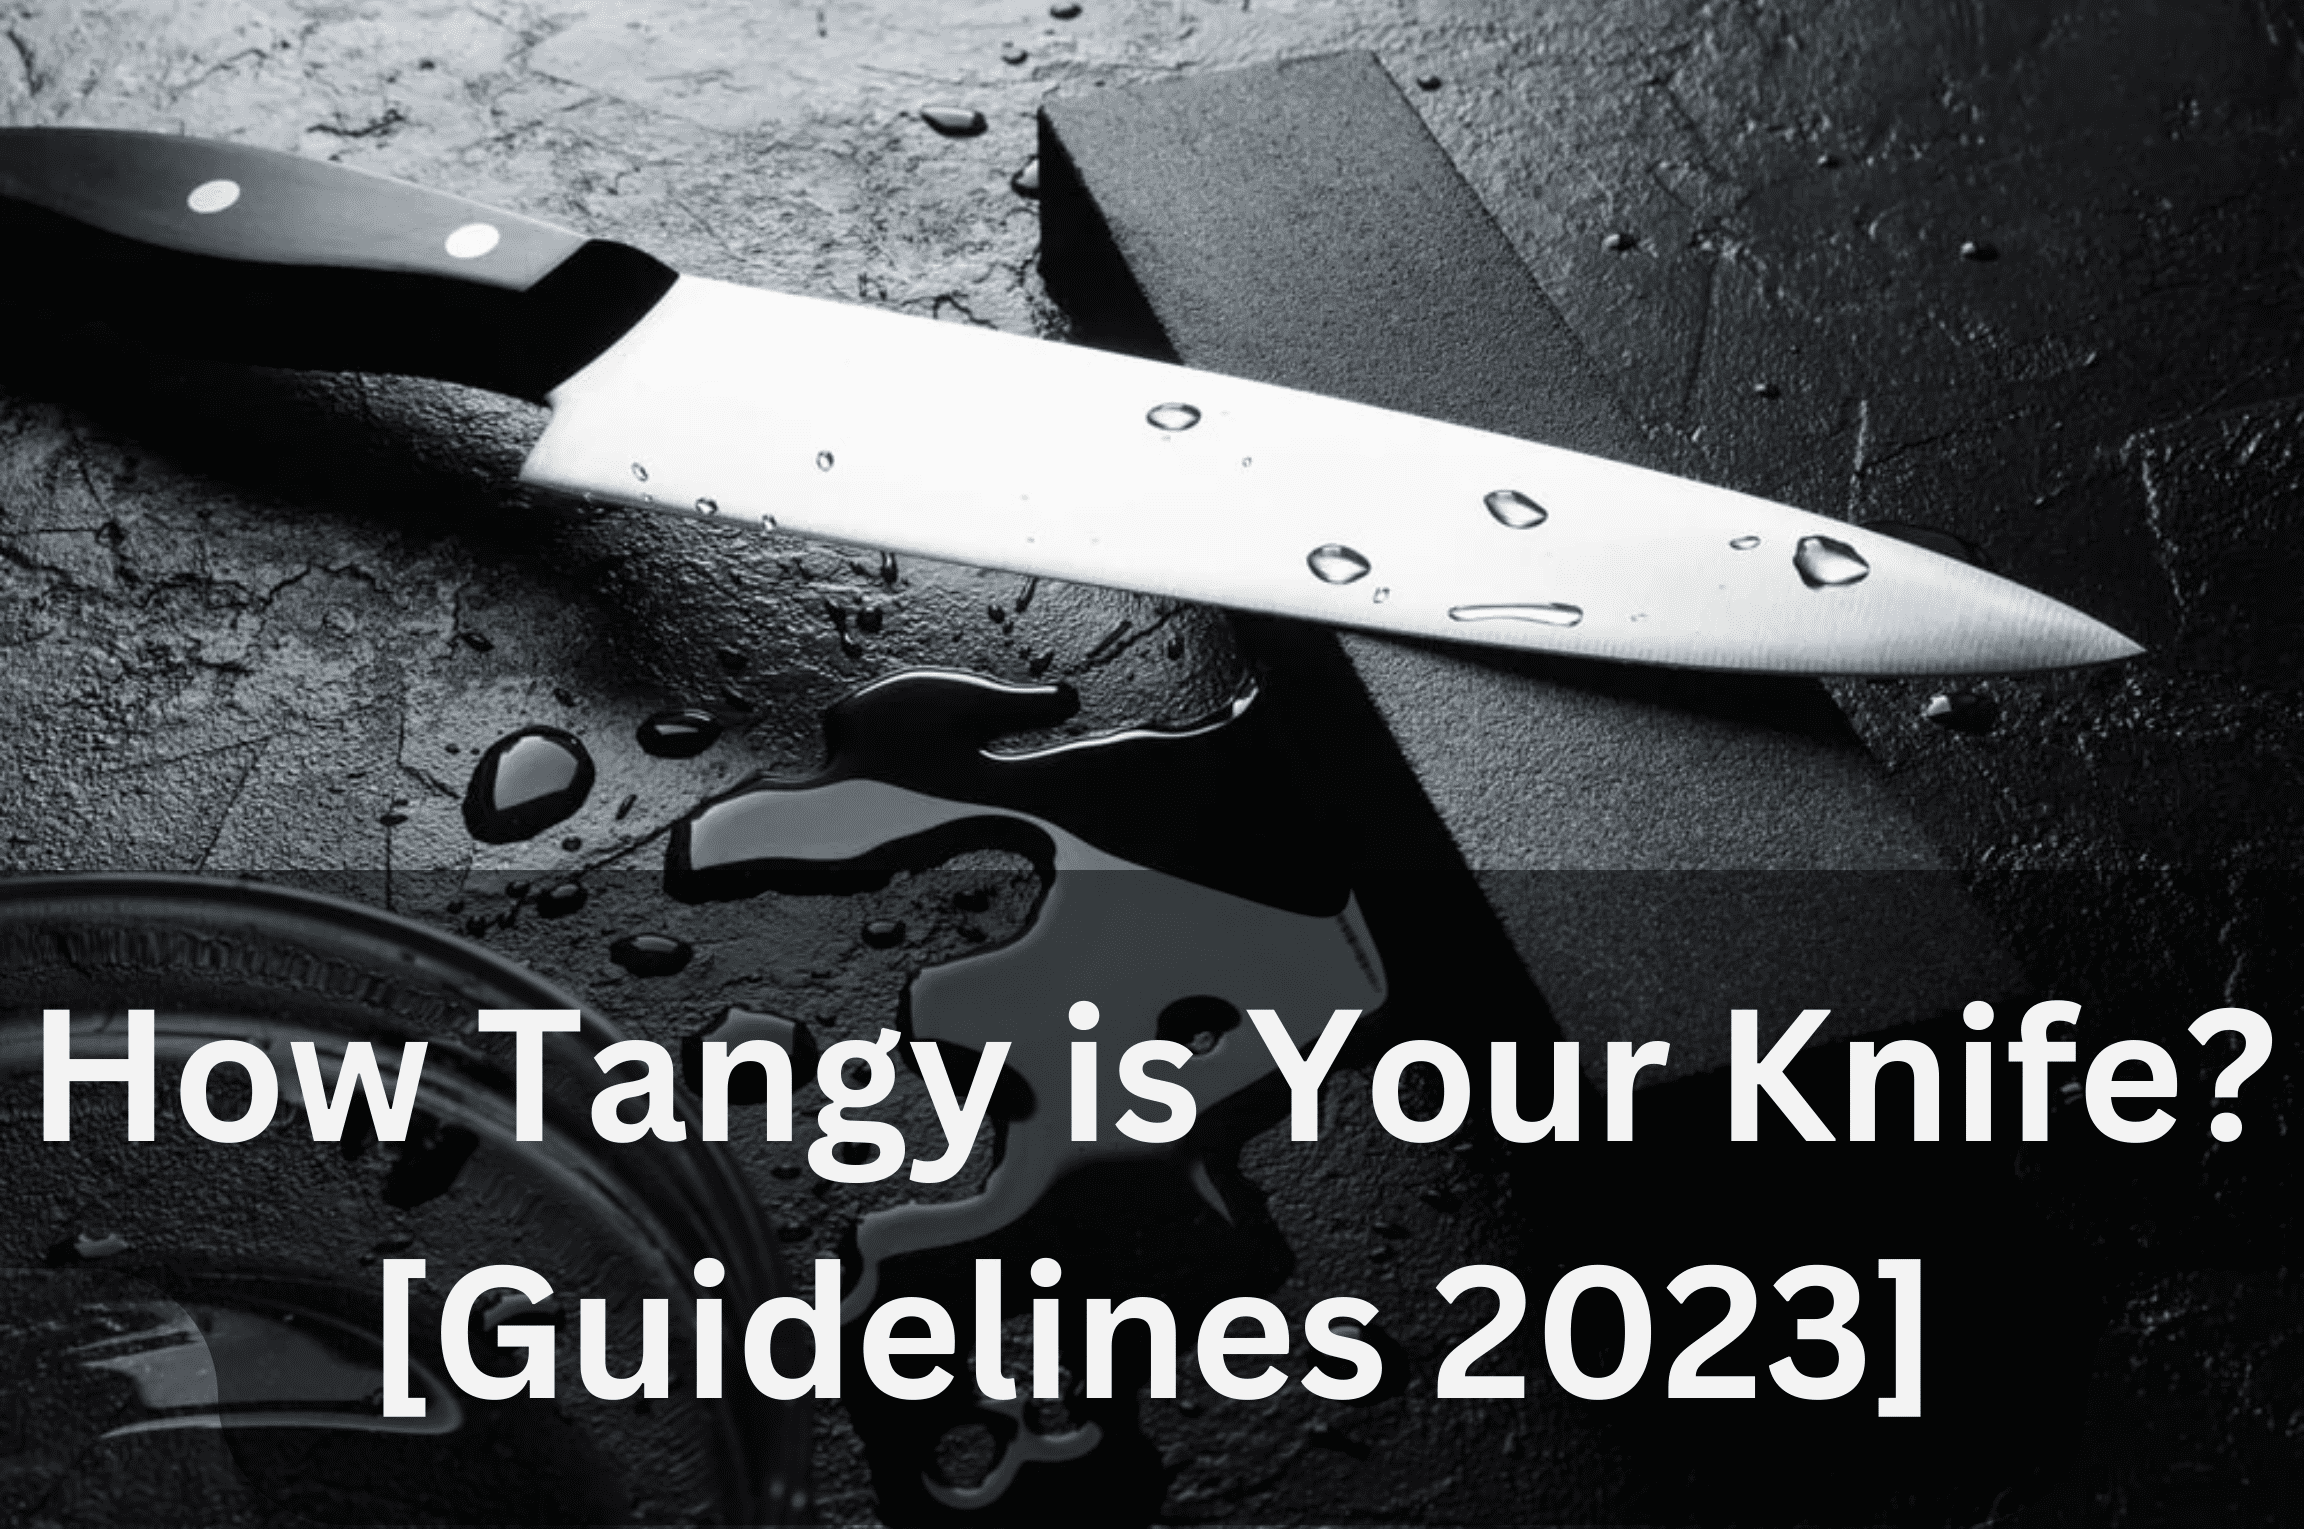 How Tangy is Your Knife? Read our new Guidelines 2023